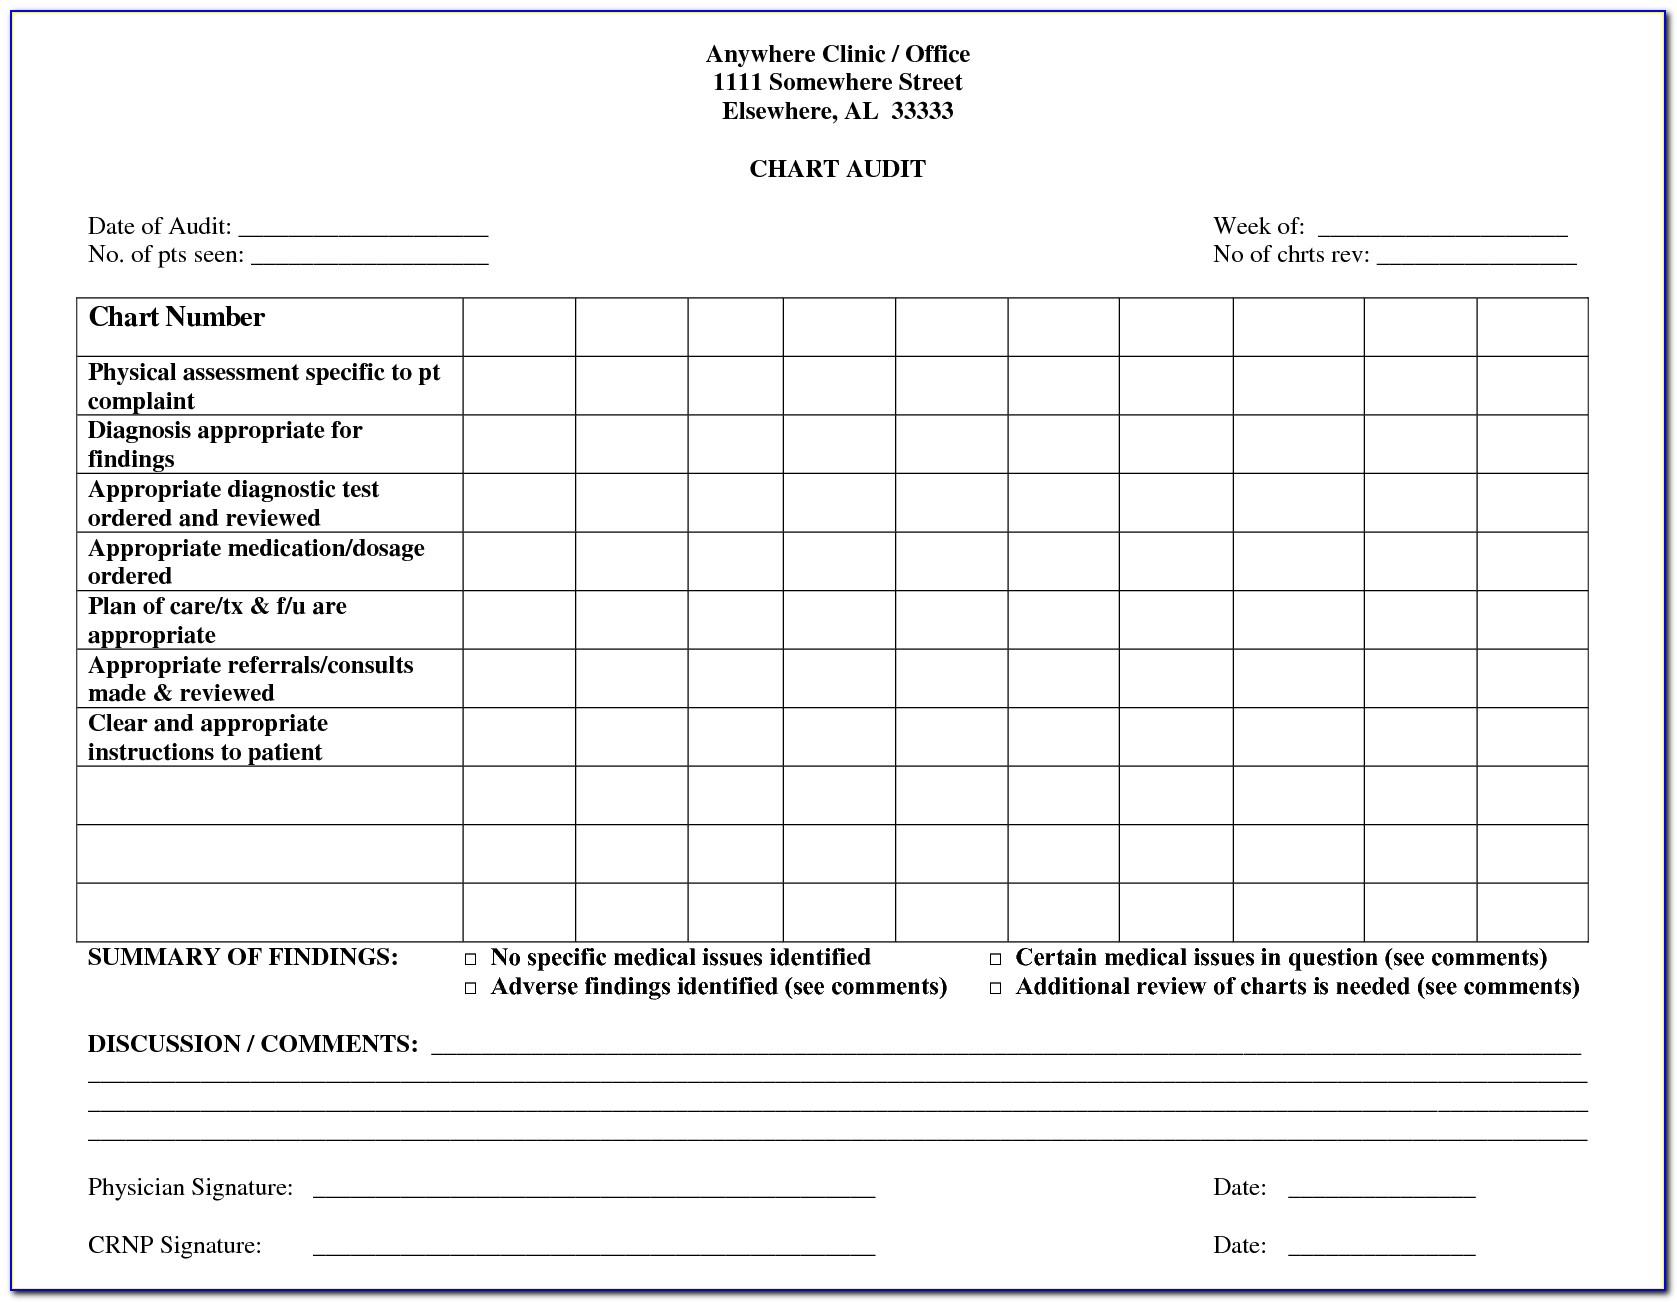 Mental Health Chart Audit Form Printable Example Printable Forms Free 